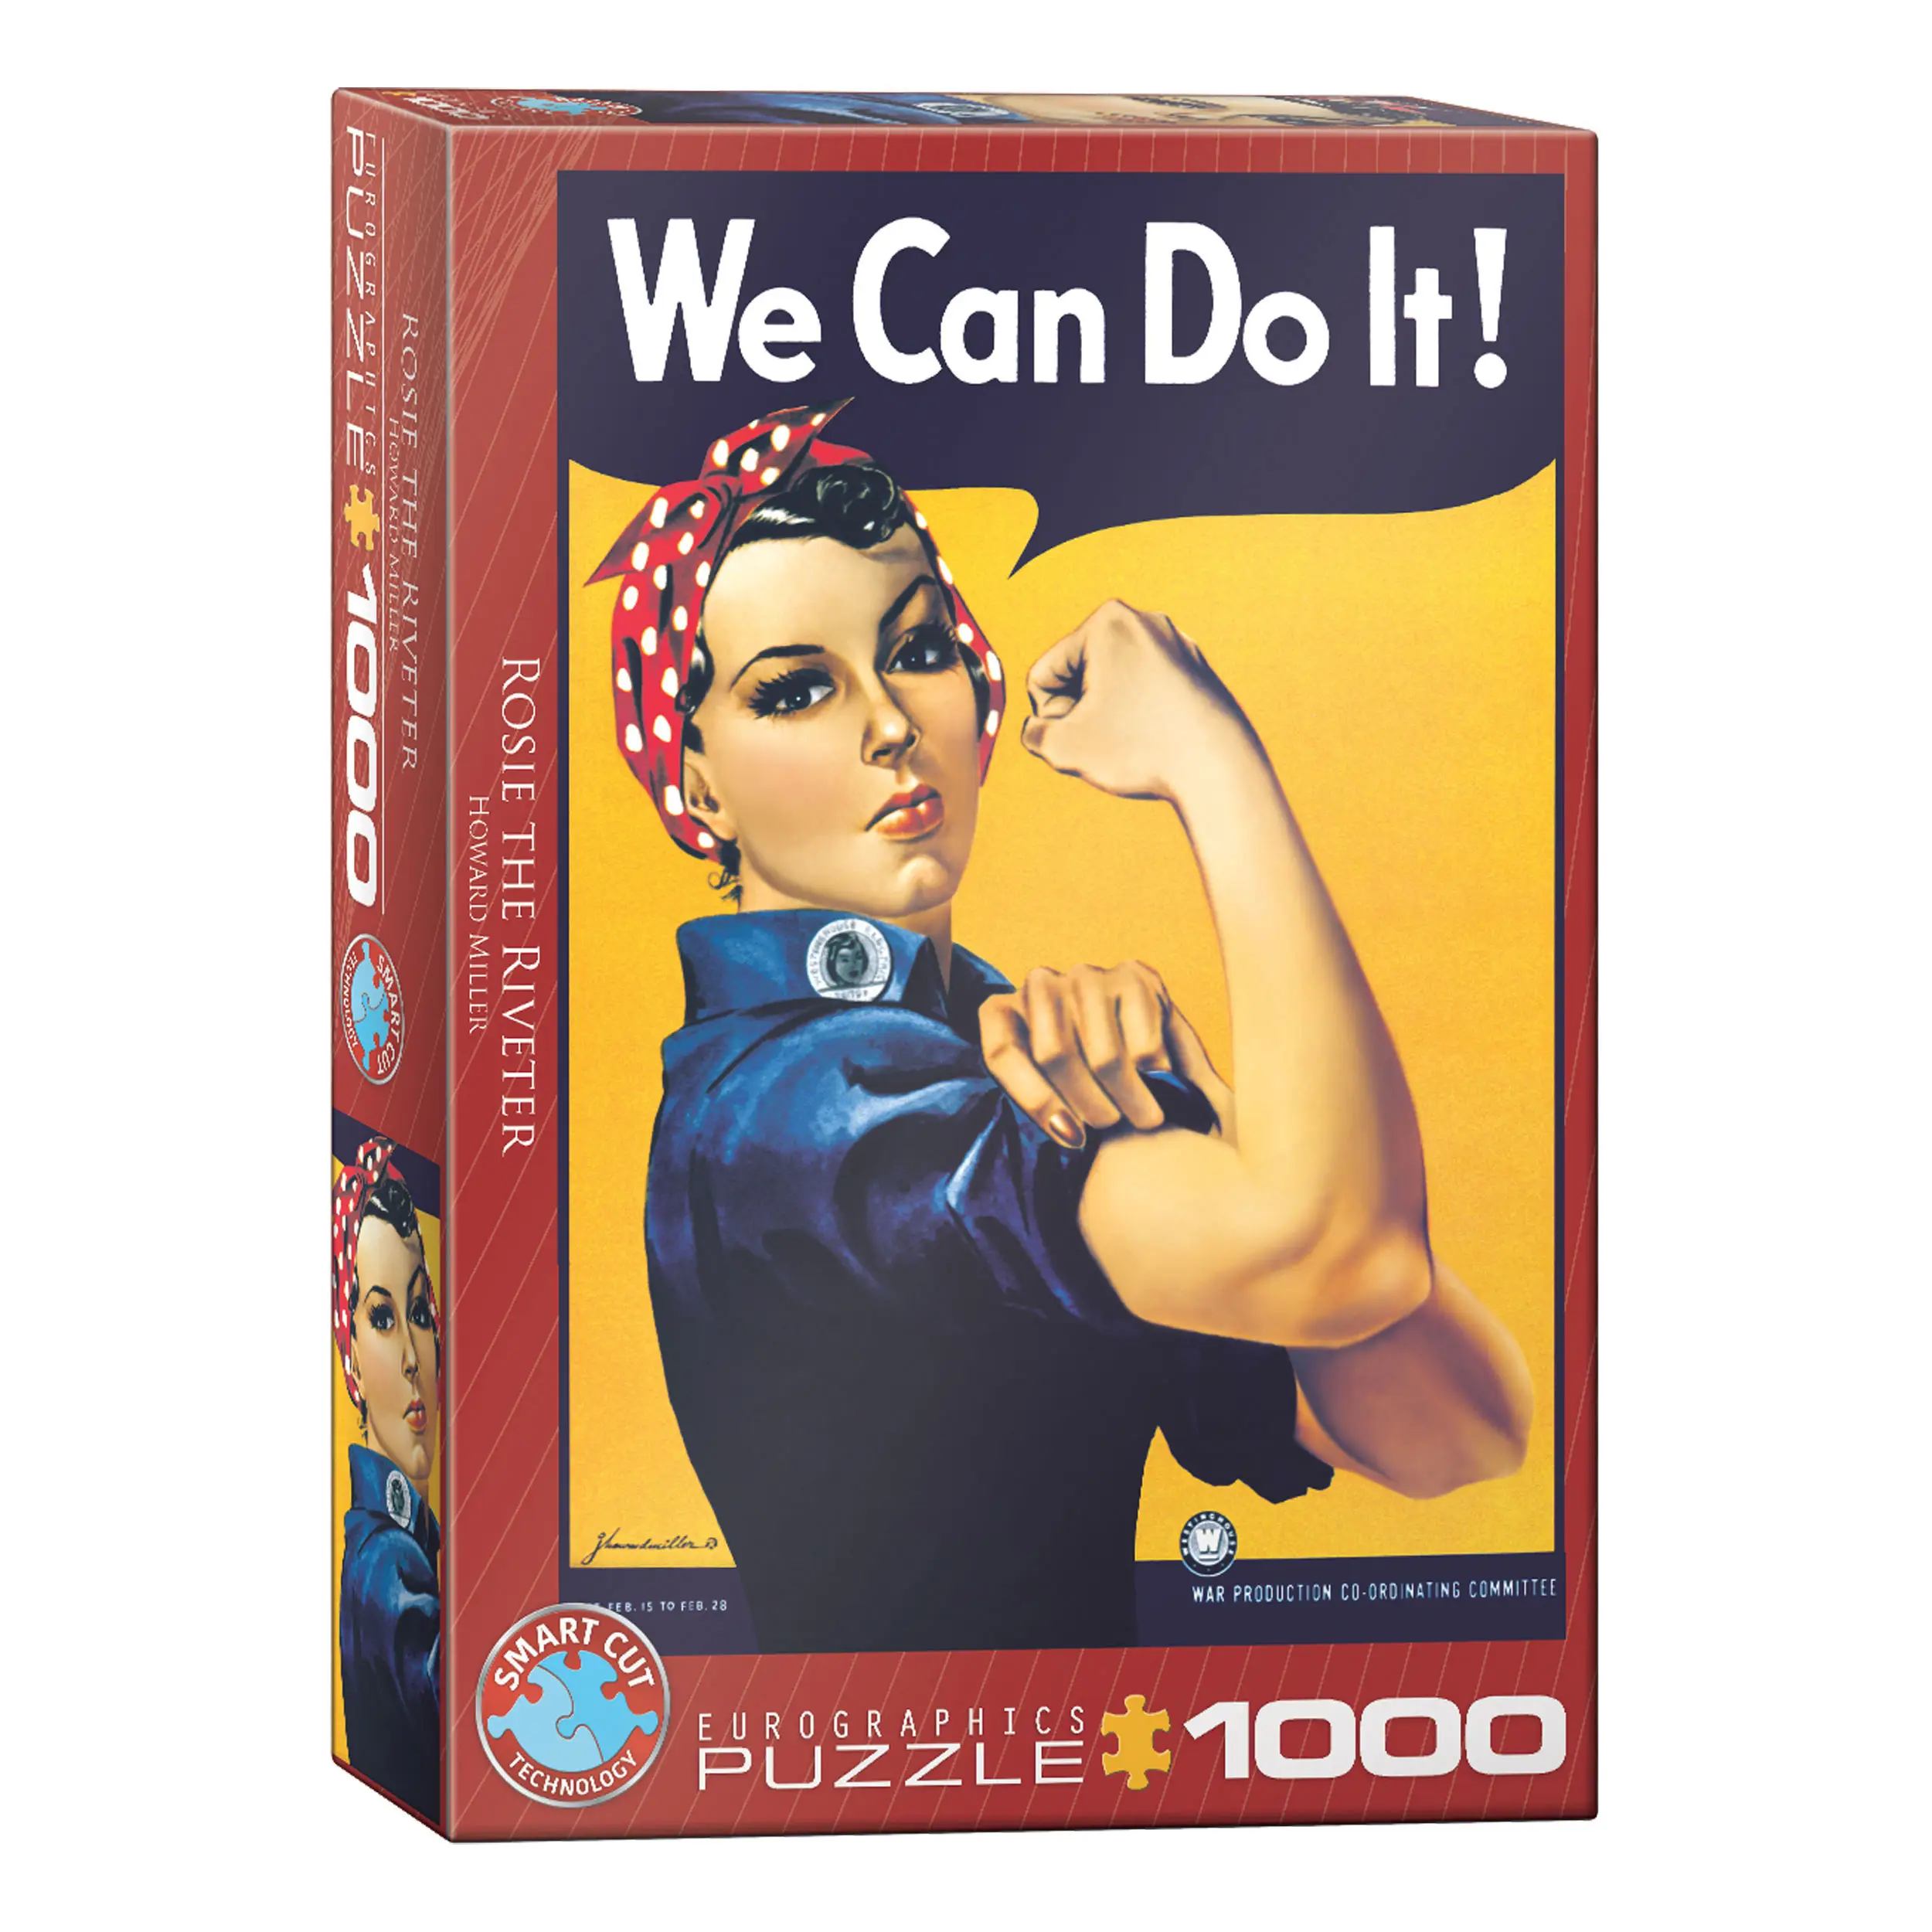 Puzzle We Teile 1000 Can Do It